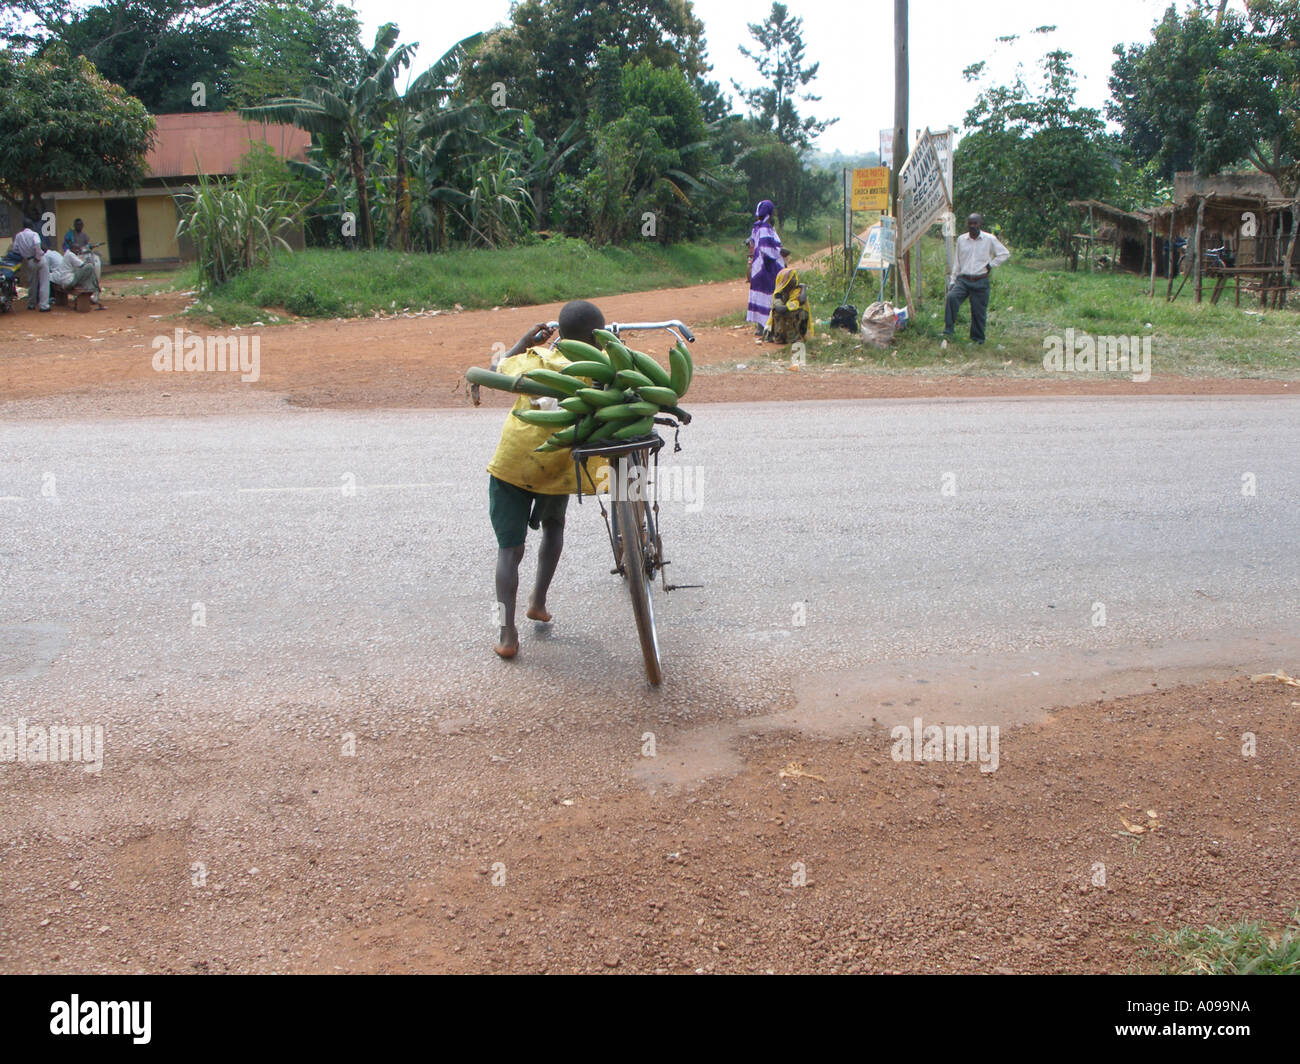 Young boy struggles with an adult sized bicycle carrying plantain Stock Photo